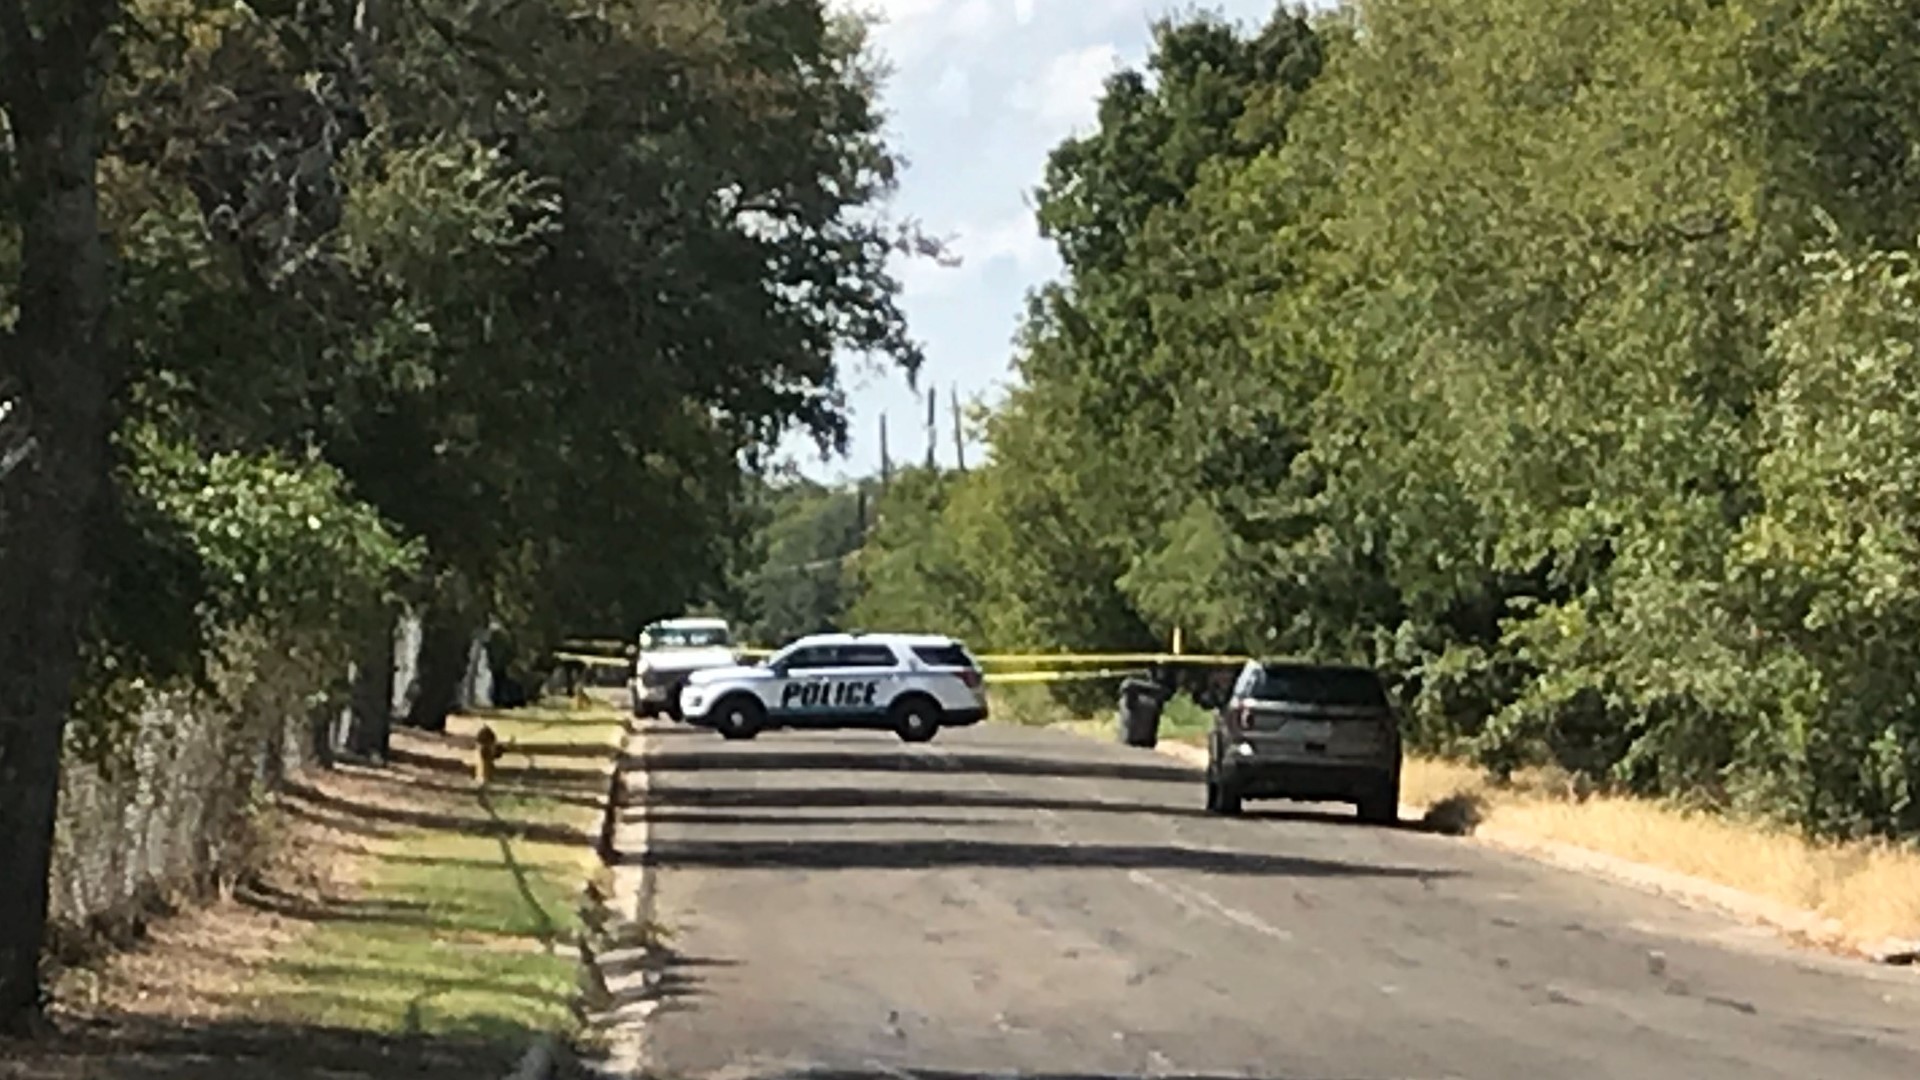 Victim of a deadly Waco shooting found near cemetery Tuesday has been identified as 17-year-old Waco student